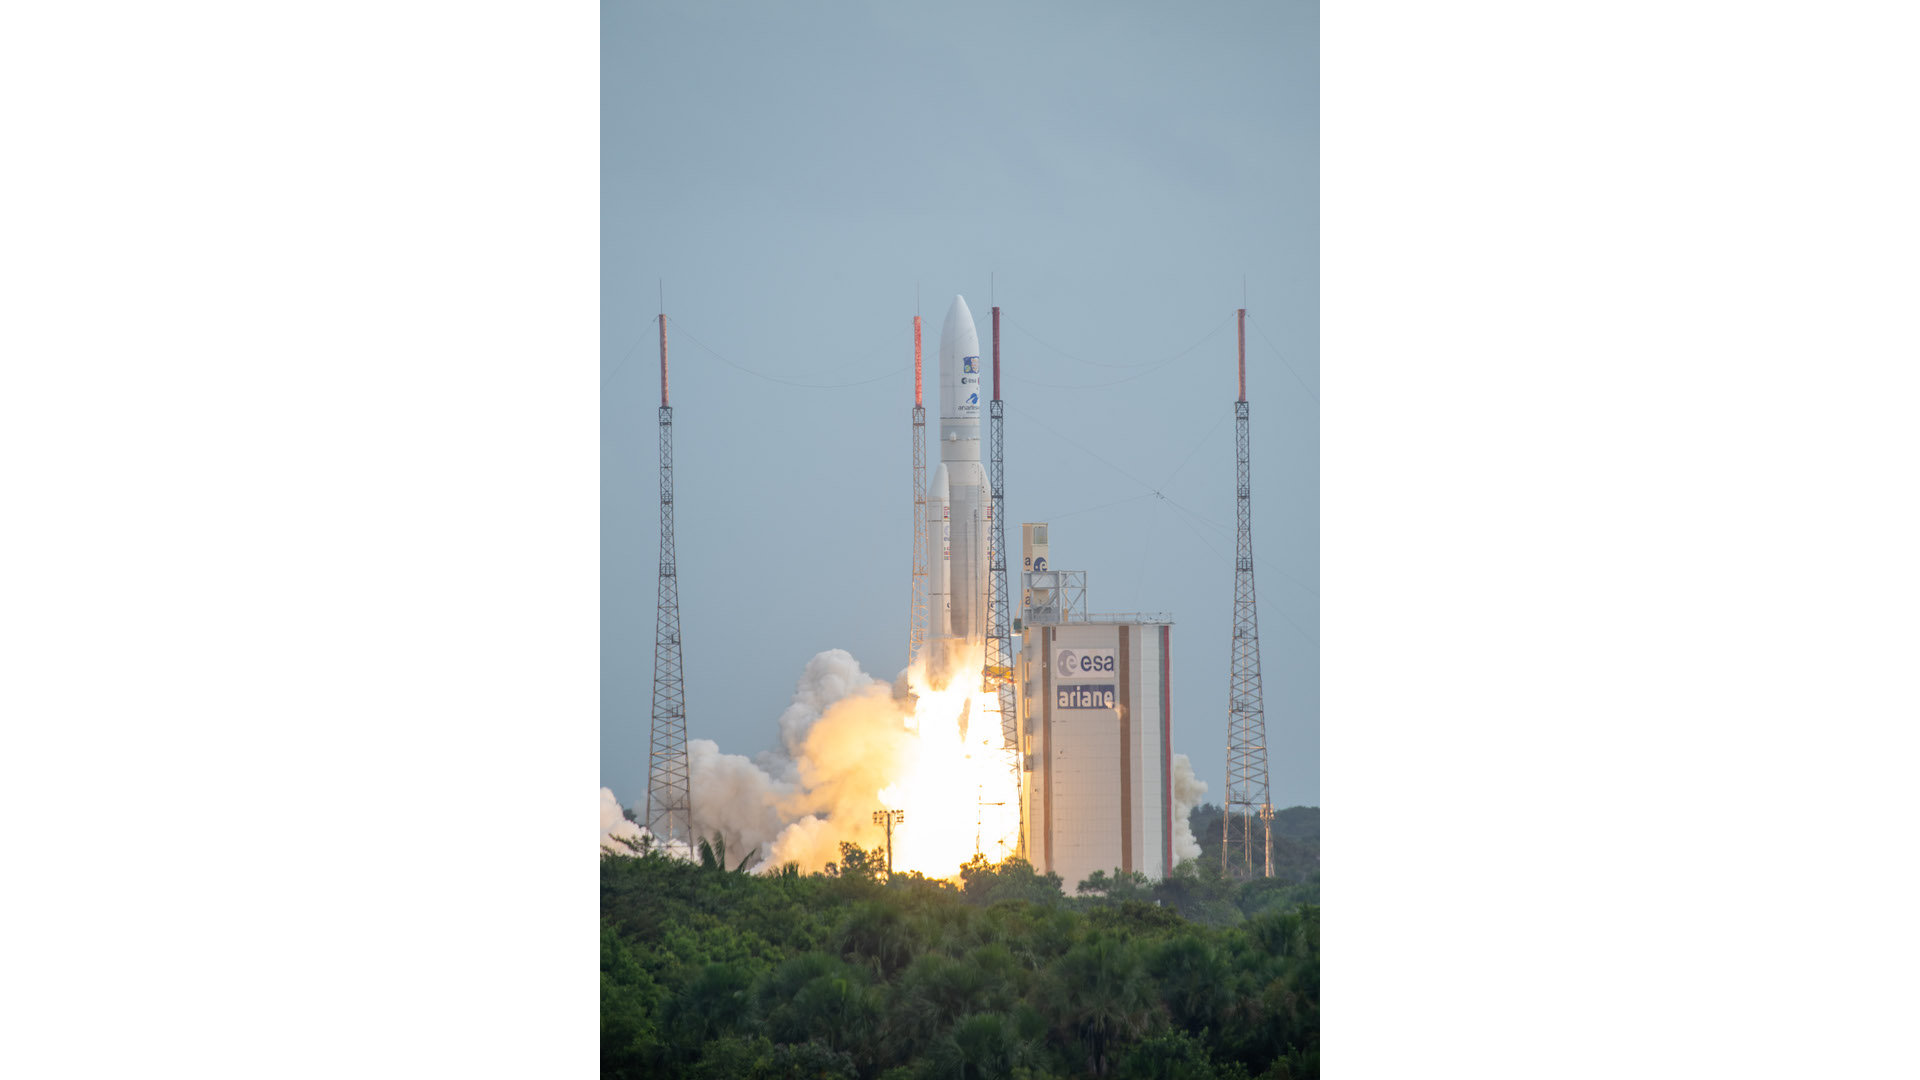 An Ariane 5 rocket lifts off against a grey/blue sky. The yellow/orange from the engine flames reflects against the launch tower. A green expanse of forest sits in the foreground.